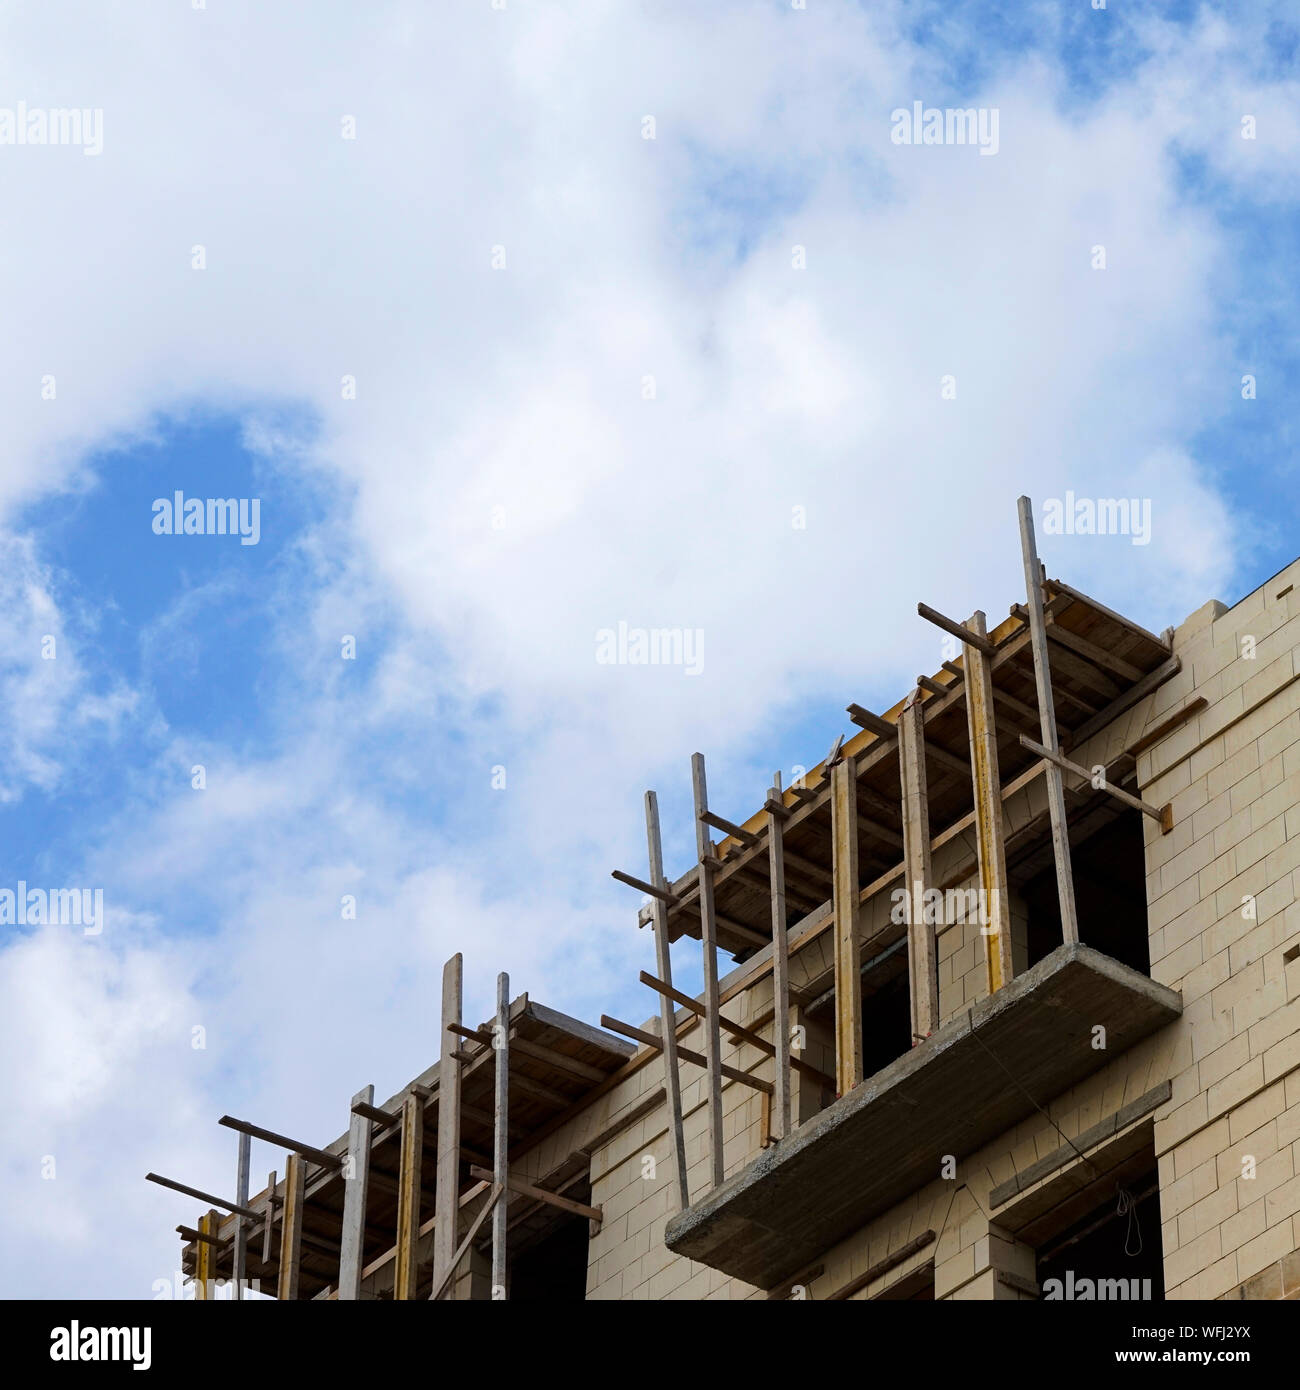 Low Angle View Of Incomplete Building At Construction Site Against Cloudy Sky Stock Photo